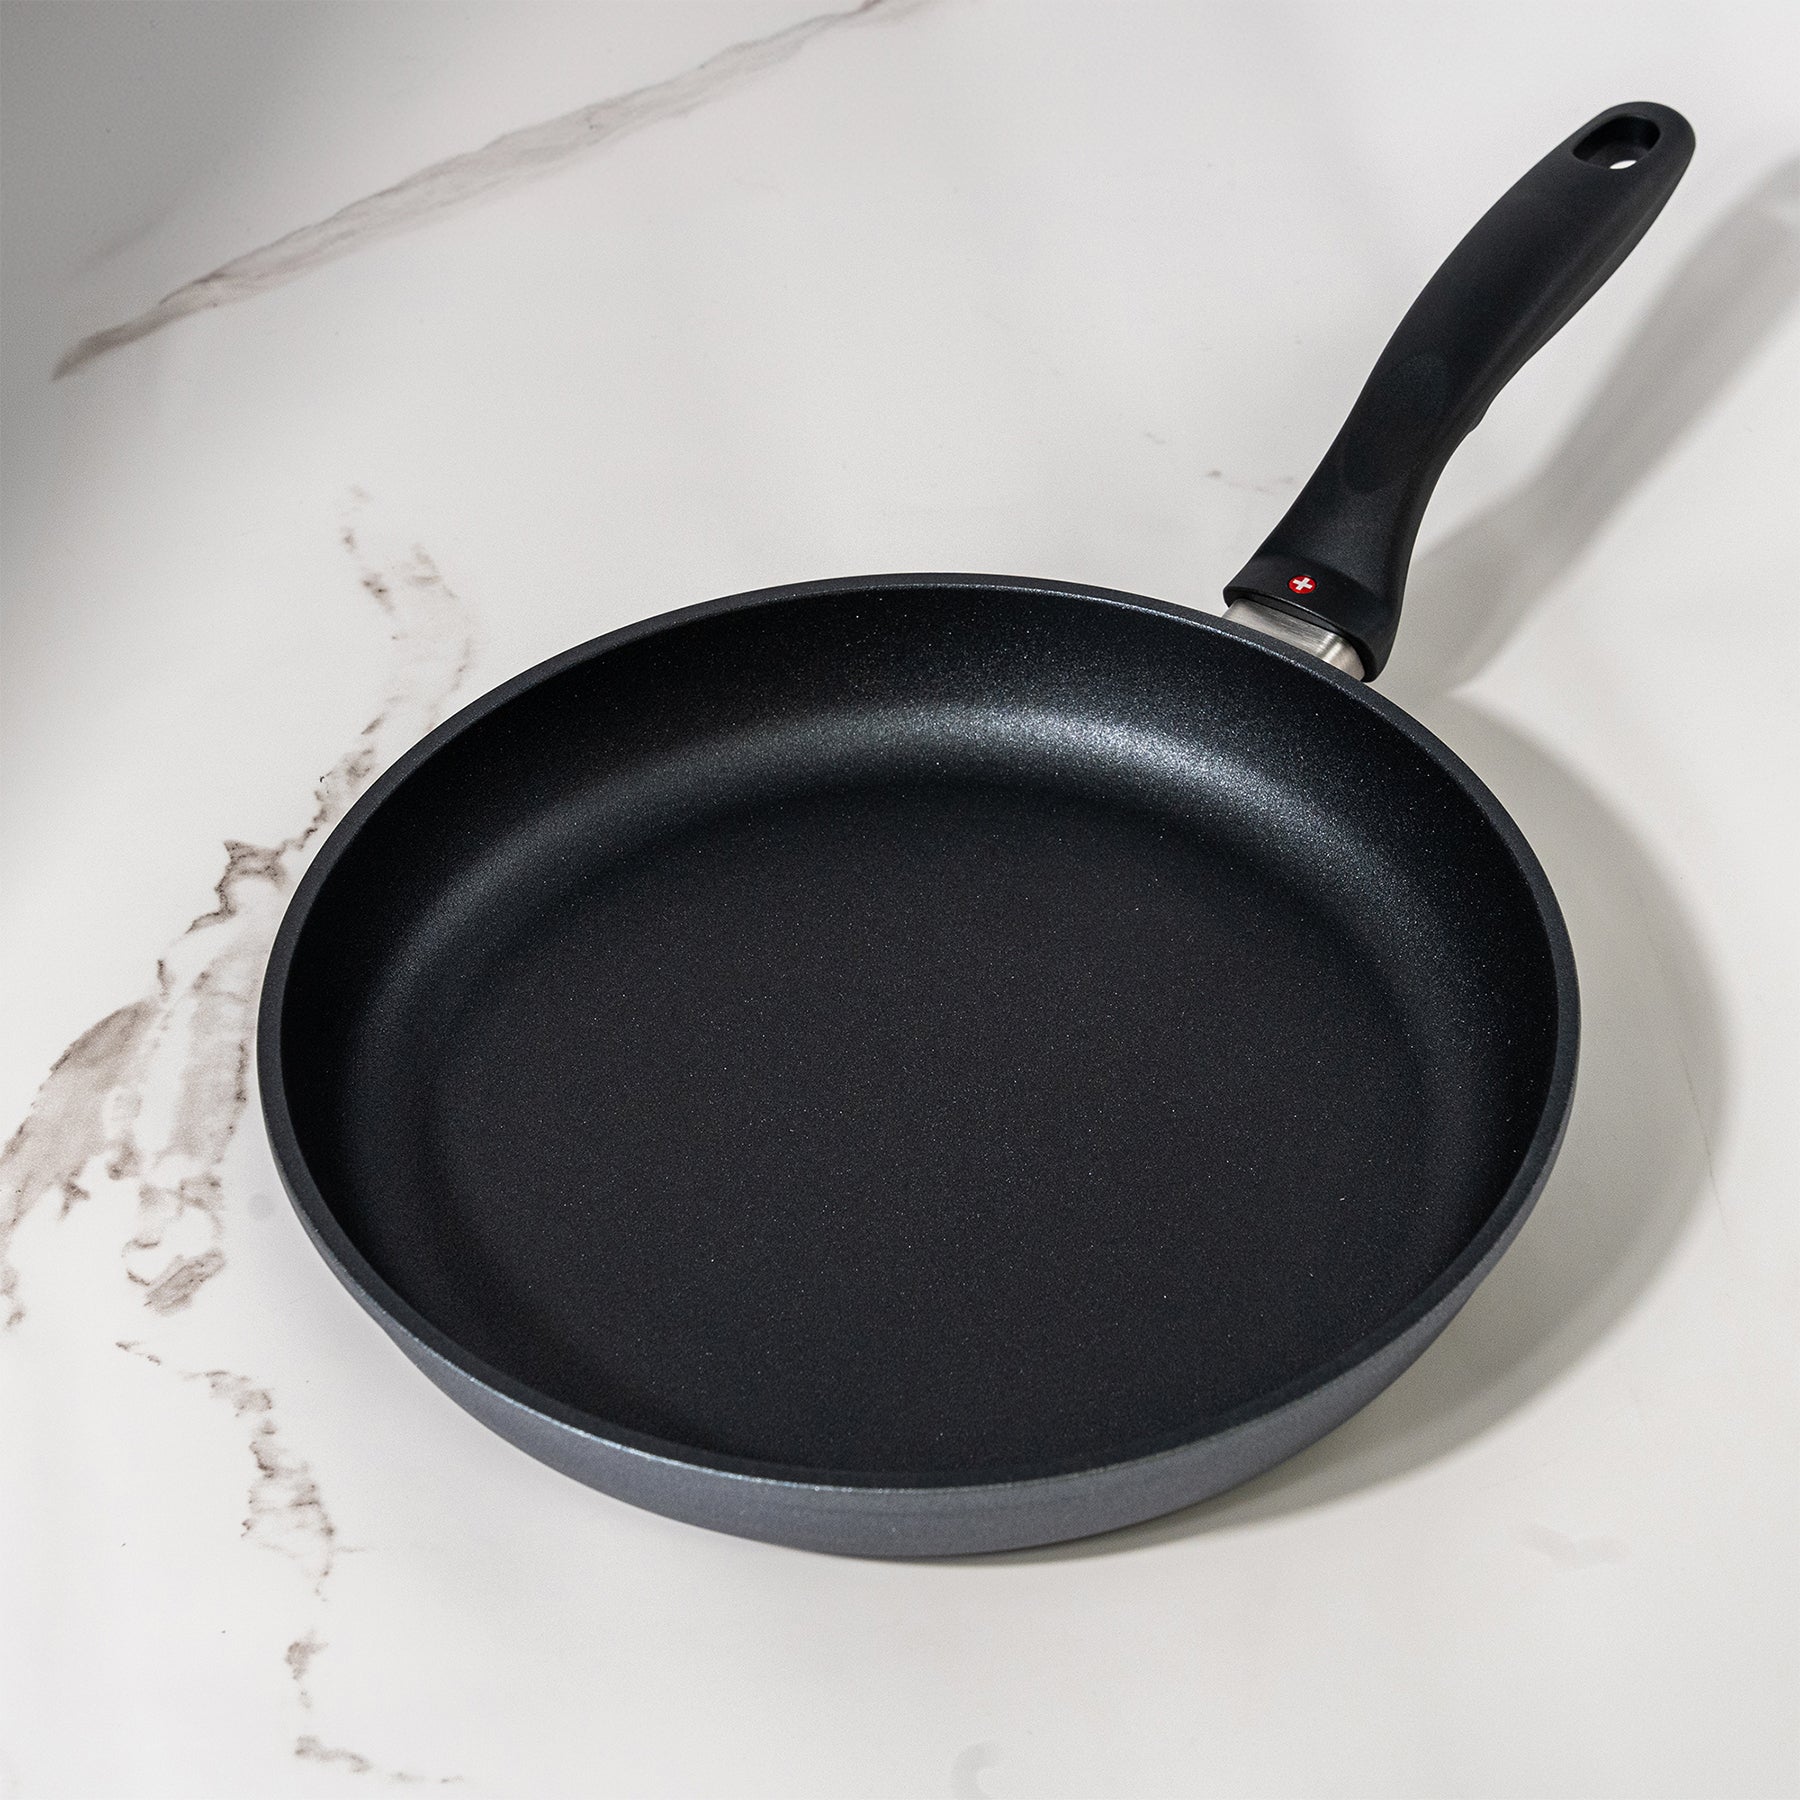 HD Nonstick Fry Pan in use on marble kitchen counter